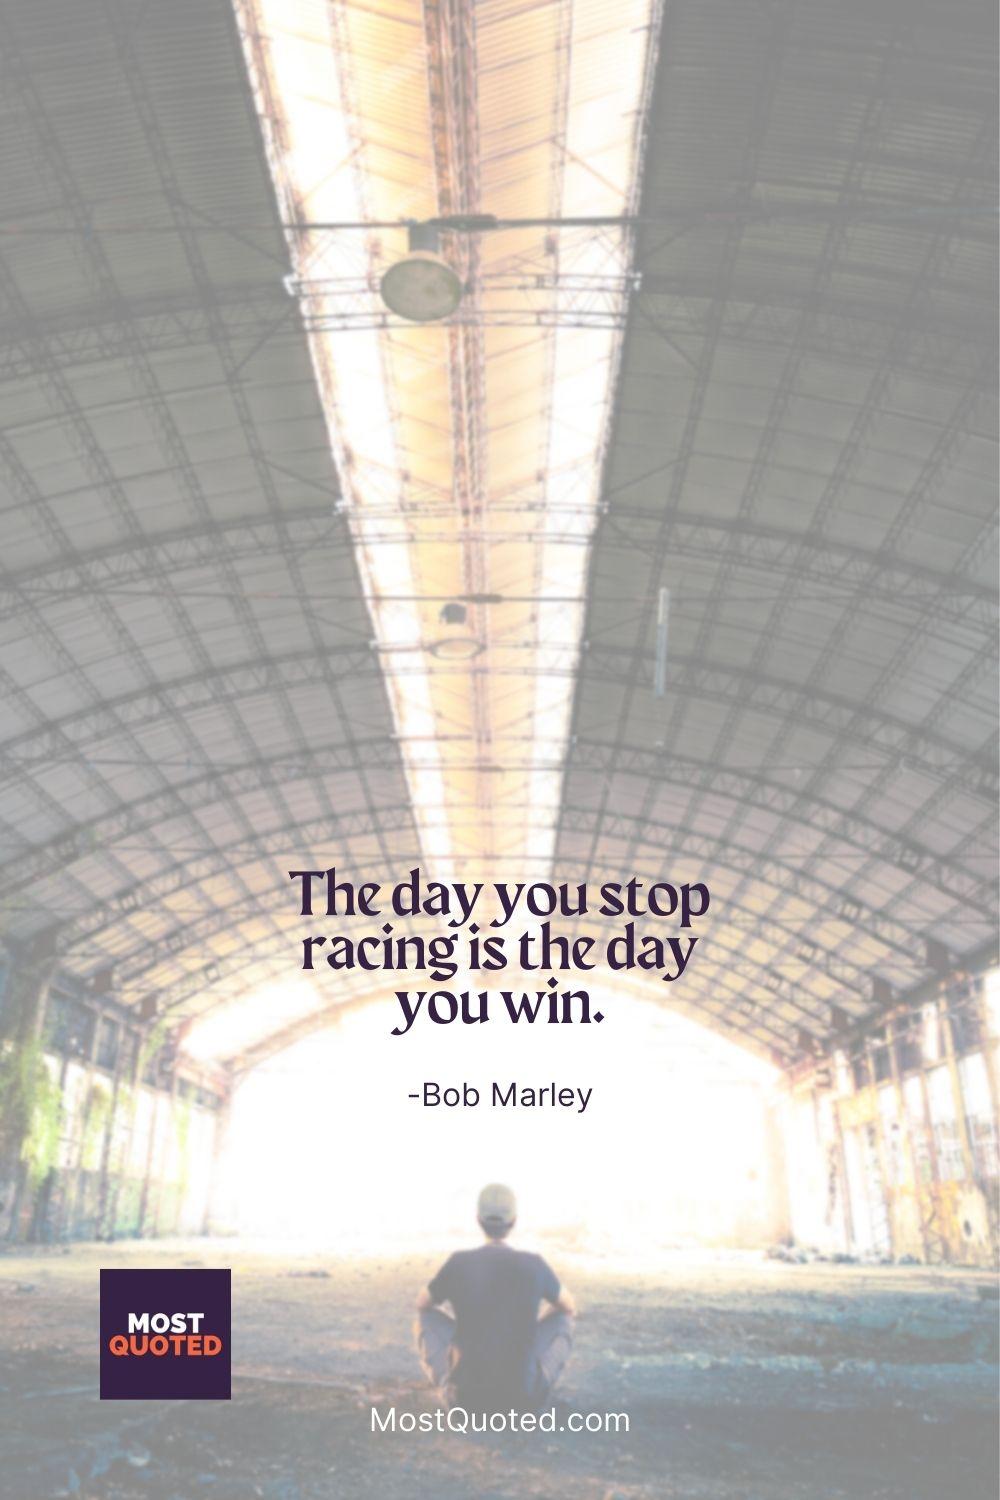 The day you stop racing is the day you win. - Bob Marley